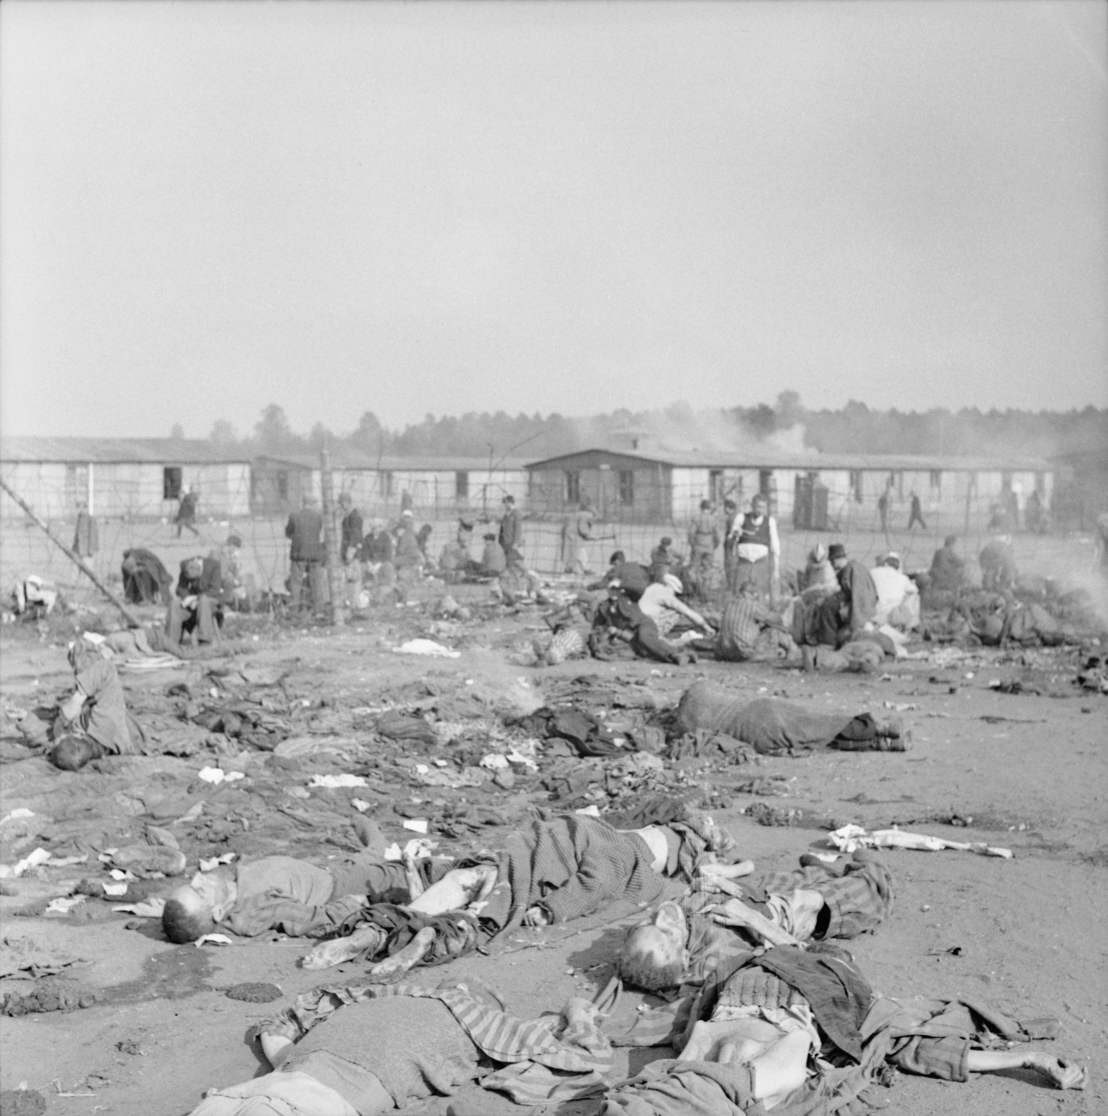 The grounds of the liberated Bergen-Belsen concentration camp, 16 April 1945. Photo by Lt. Wilson. Imperial War Museum, London, Photograph Archive, BU 3767.